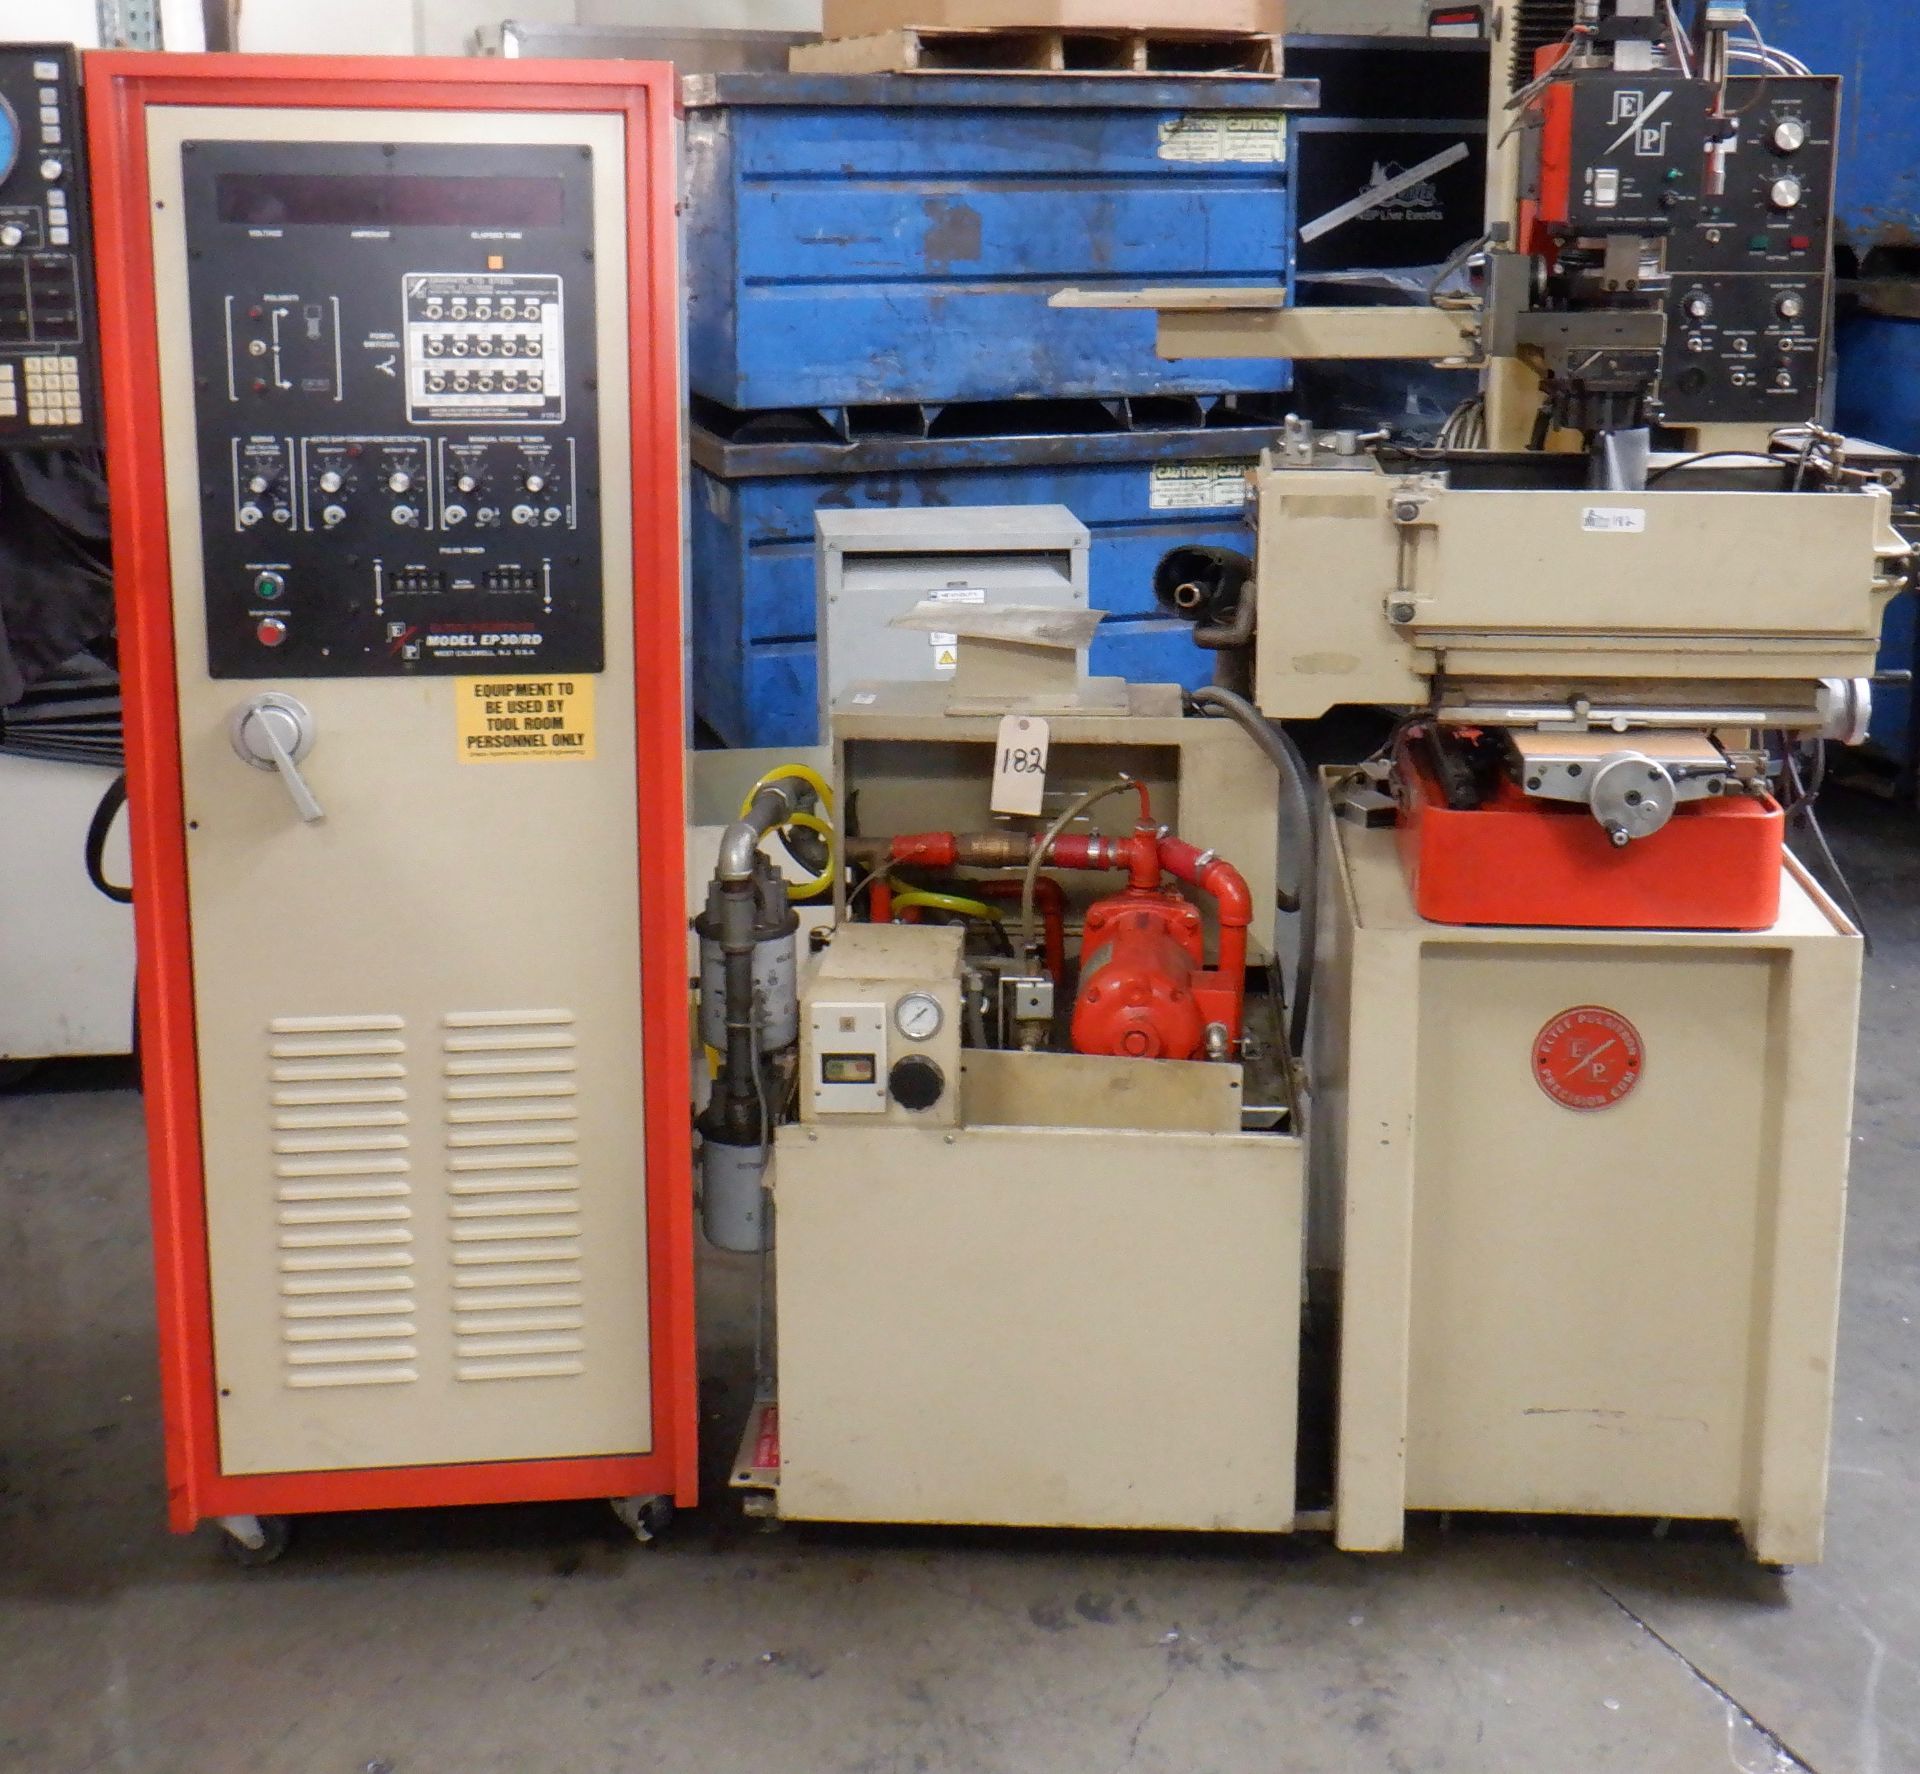 ELTEE PULSITRON EDM MACHINE FOR PARTS AND REPAIR VERY LARGE VERY HEAVY - Image 2 of 30